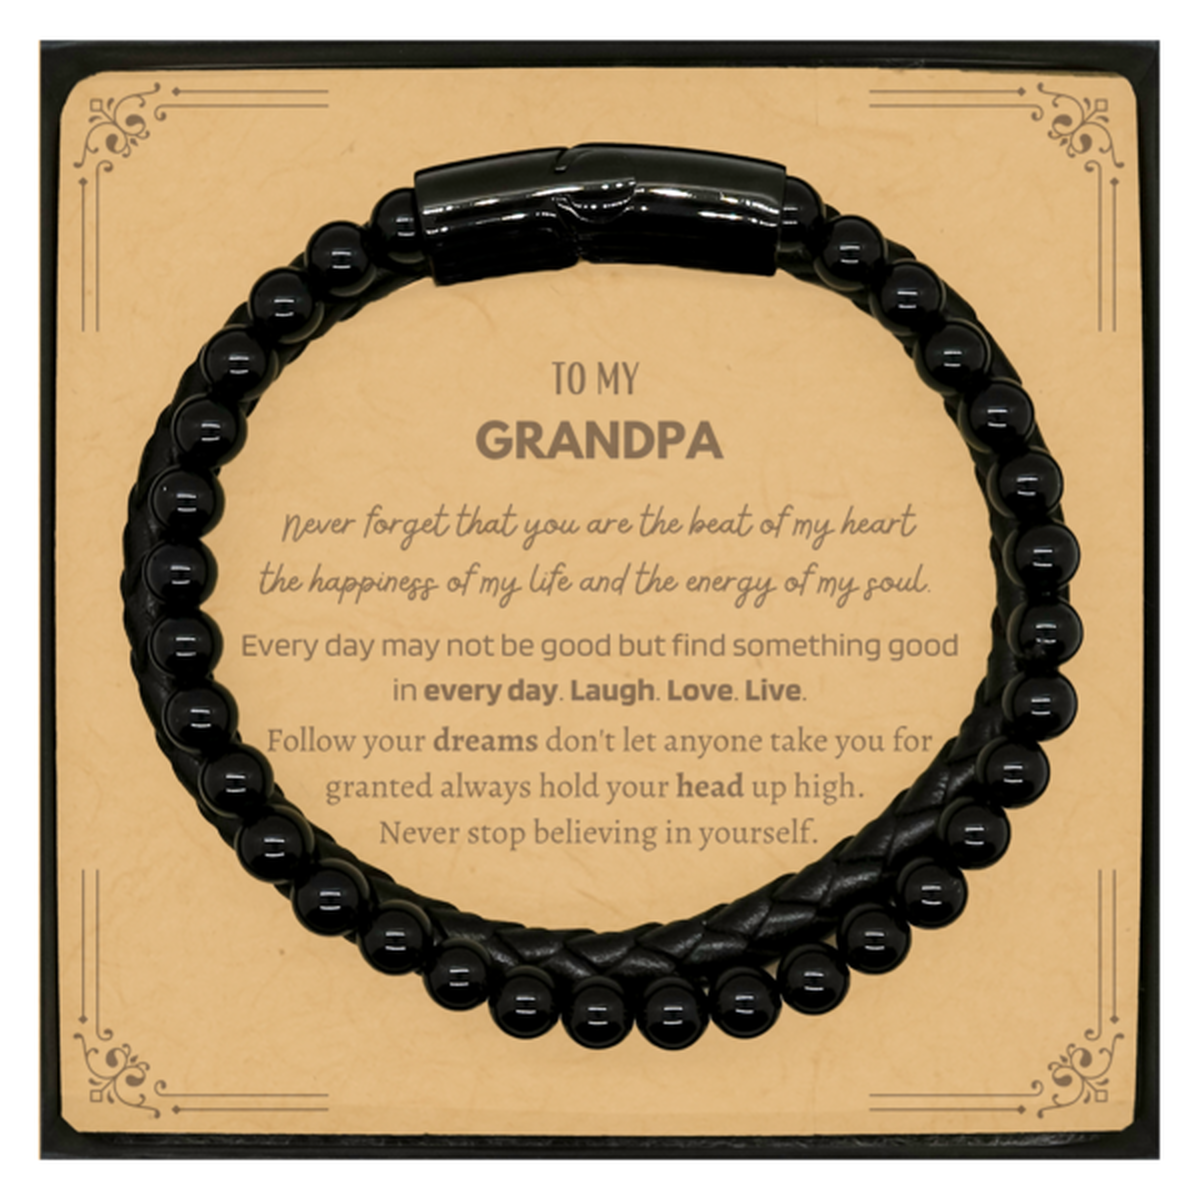 To My Grandpa Message Card Gifts, Christmas Grandpa Stone Leather Bracelets Present, Birthday Unique Motivational For Grandpa, To My Grandpa Never forget that you are the beat of my heart the happiness of my life and the energy of my soul